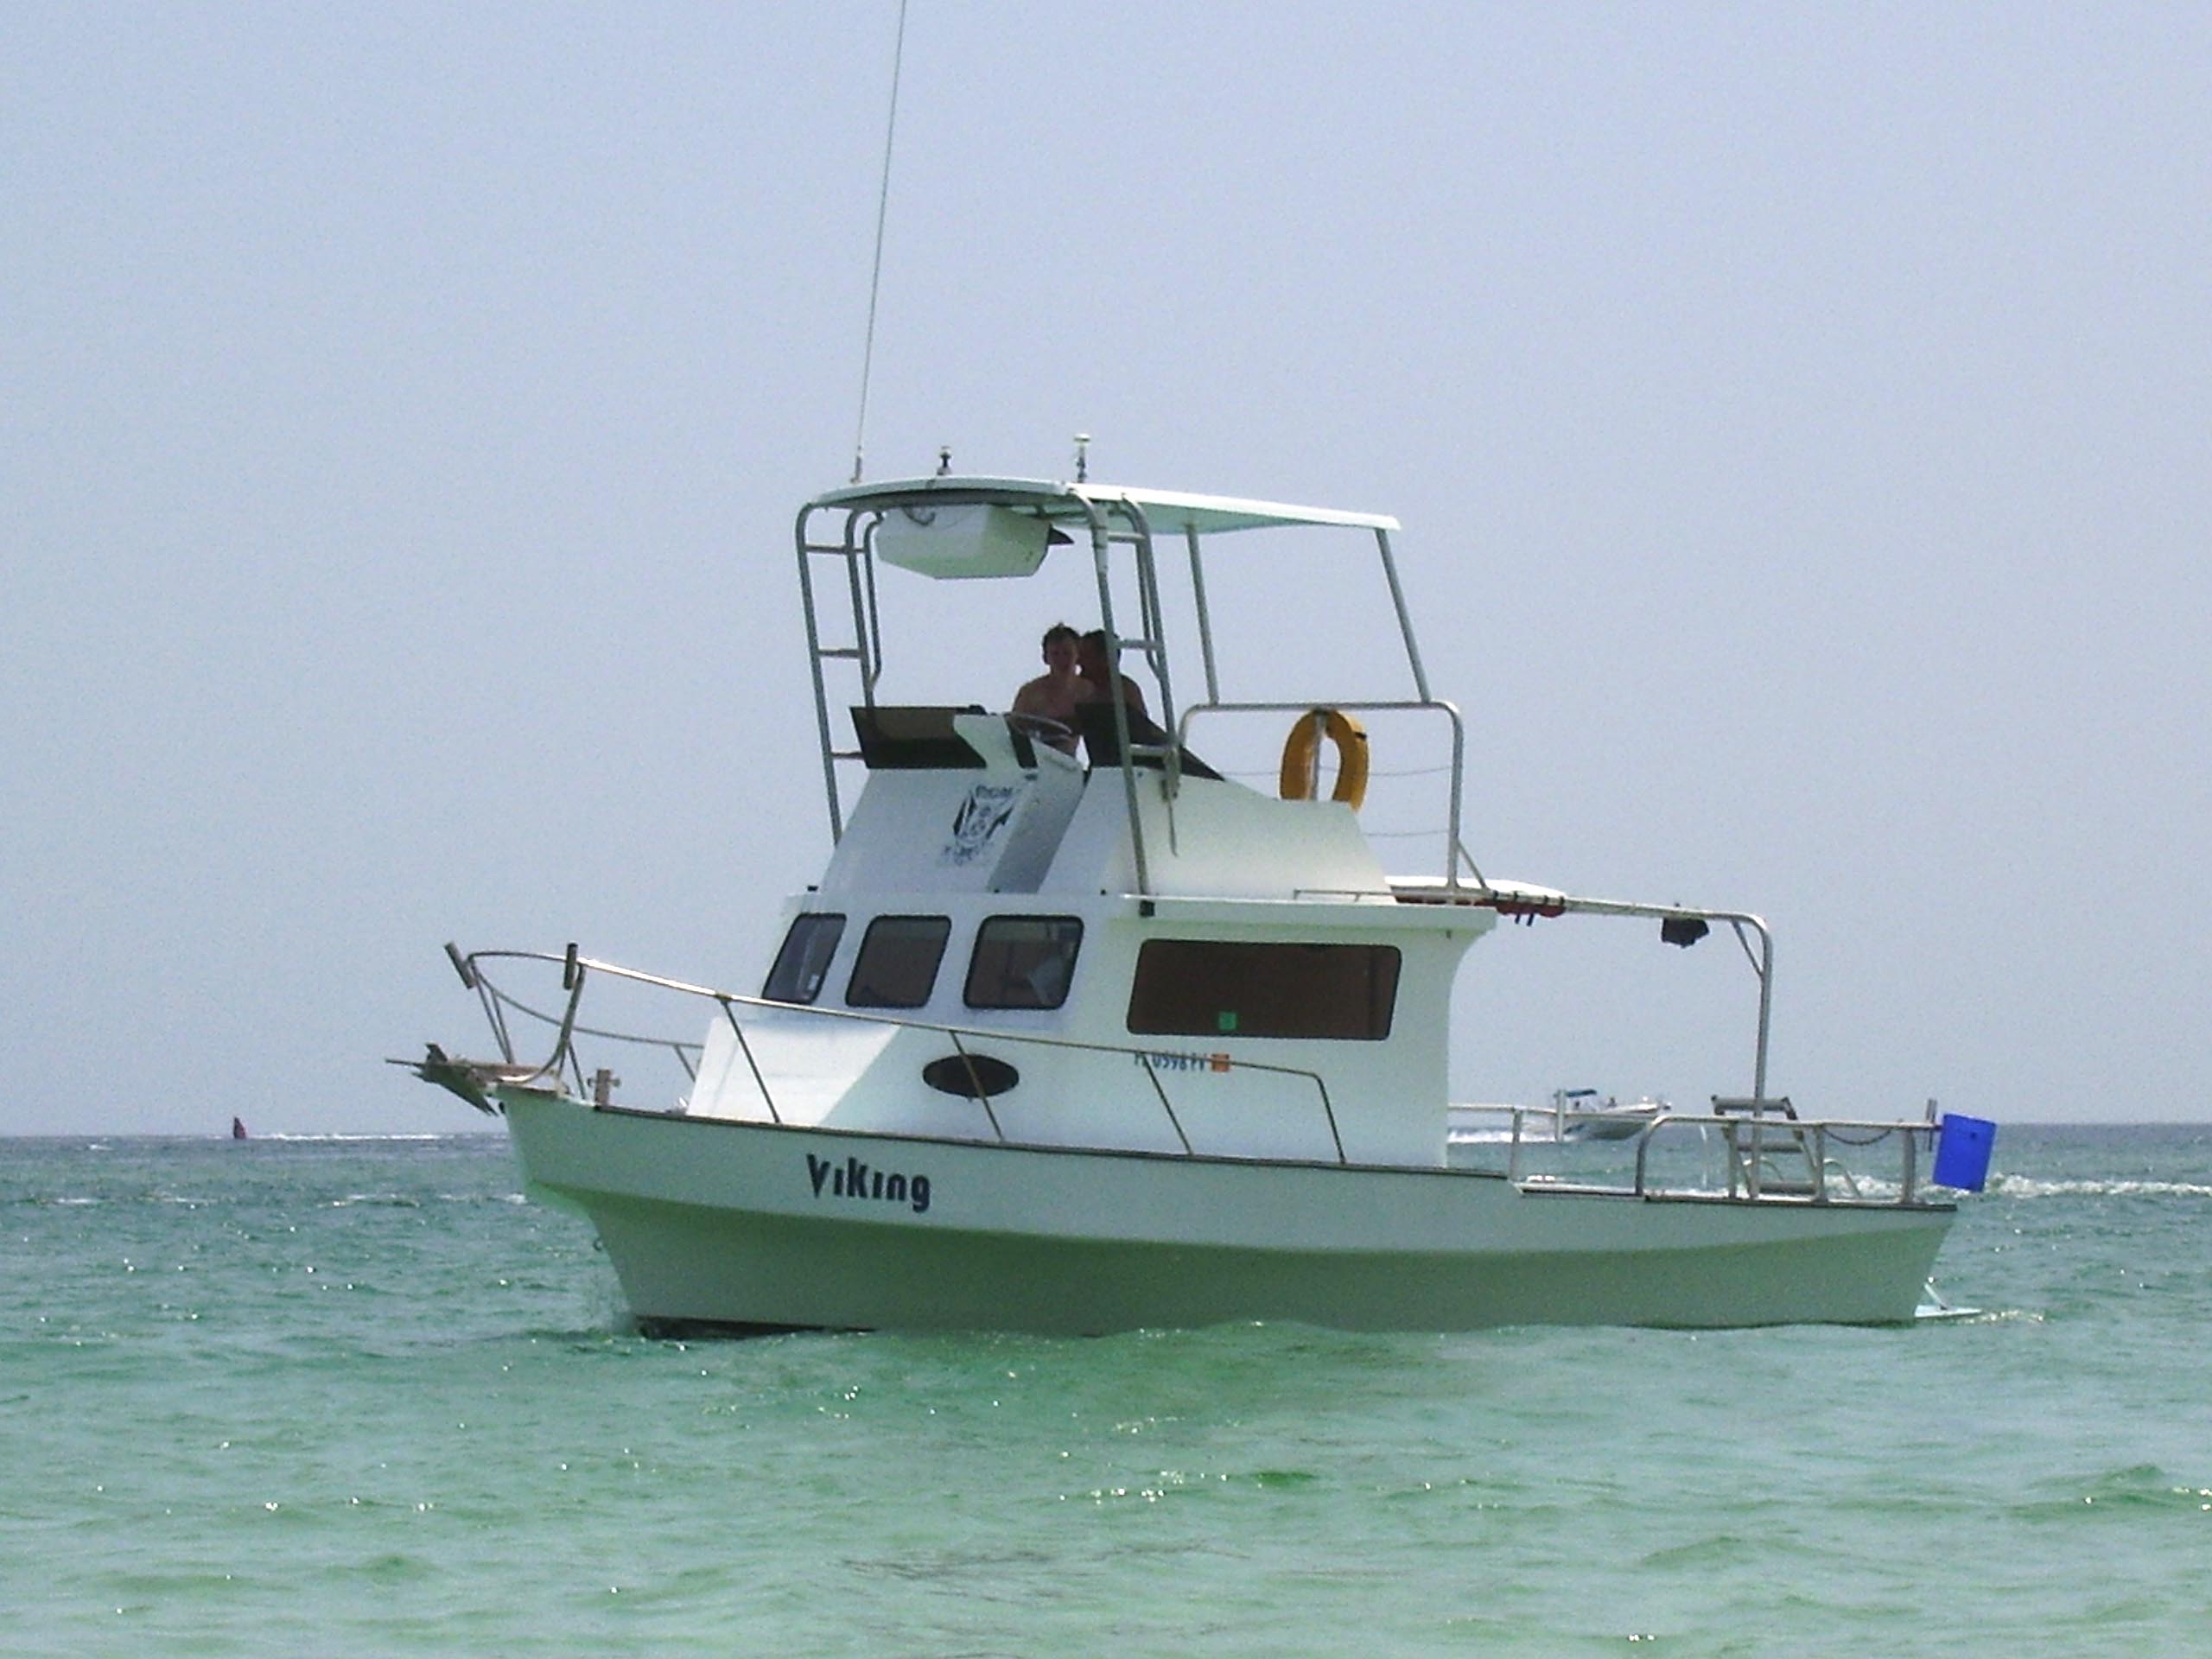 Dive Center For Sale - Full Service Established Dive Charter and Training Operation